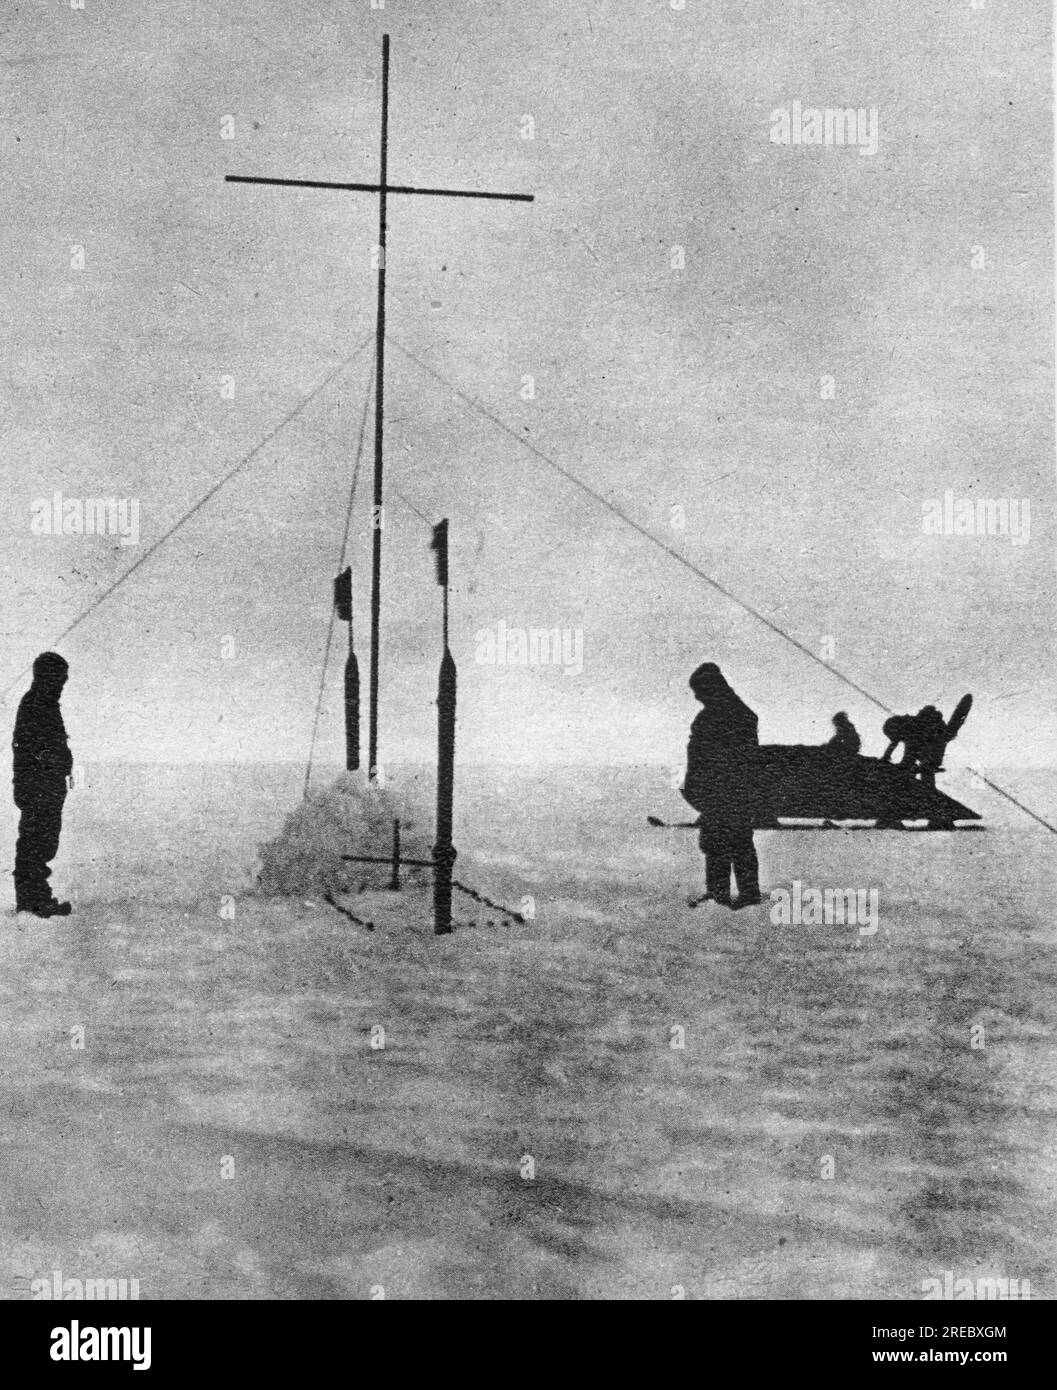 Wegener, Alfred Lothar, 1.11.1880 - November 1930, German geophysicist, his grave on Greenland, 1931, ADDITIONAL-RIGHTS-CLEARANCE-INFO-NOT-AVAILABLE Stock Photo